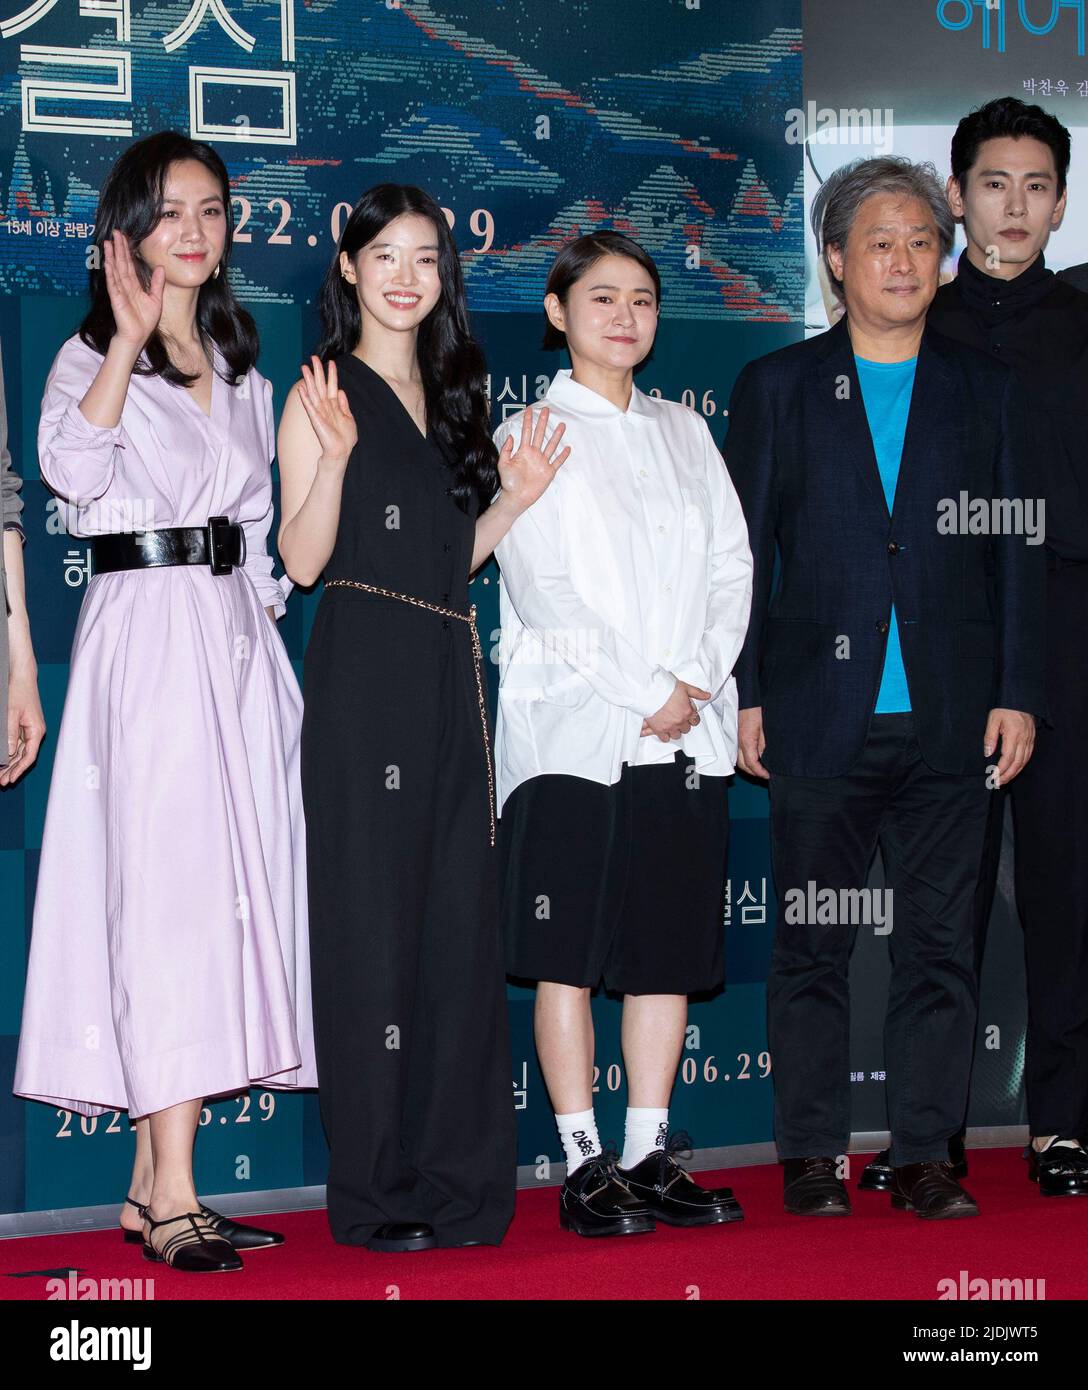 Seoul, South Korea. 21st June, 2022. (L to R) Chinese actress Tang Wei, Jung Yi-seo, comedian Kim Shin-young, director Park Chan-wook, pose for photos during a VIP premiere to promote the film 'Decision to Leave' in Seoul, South Korea on June 21, 2022. The movie is to be released in South Korea on June 29. (Photo by Lee Young-ho/Sipa USA) Credit: Sipa USA/Alamy Live News Stock Photo